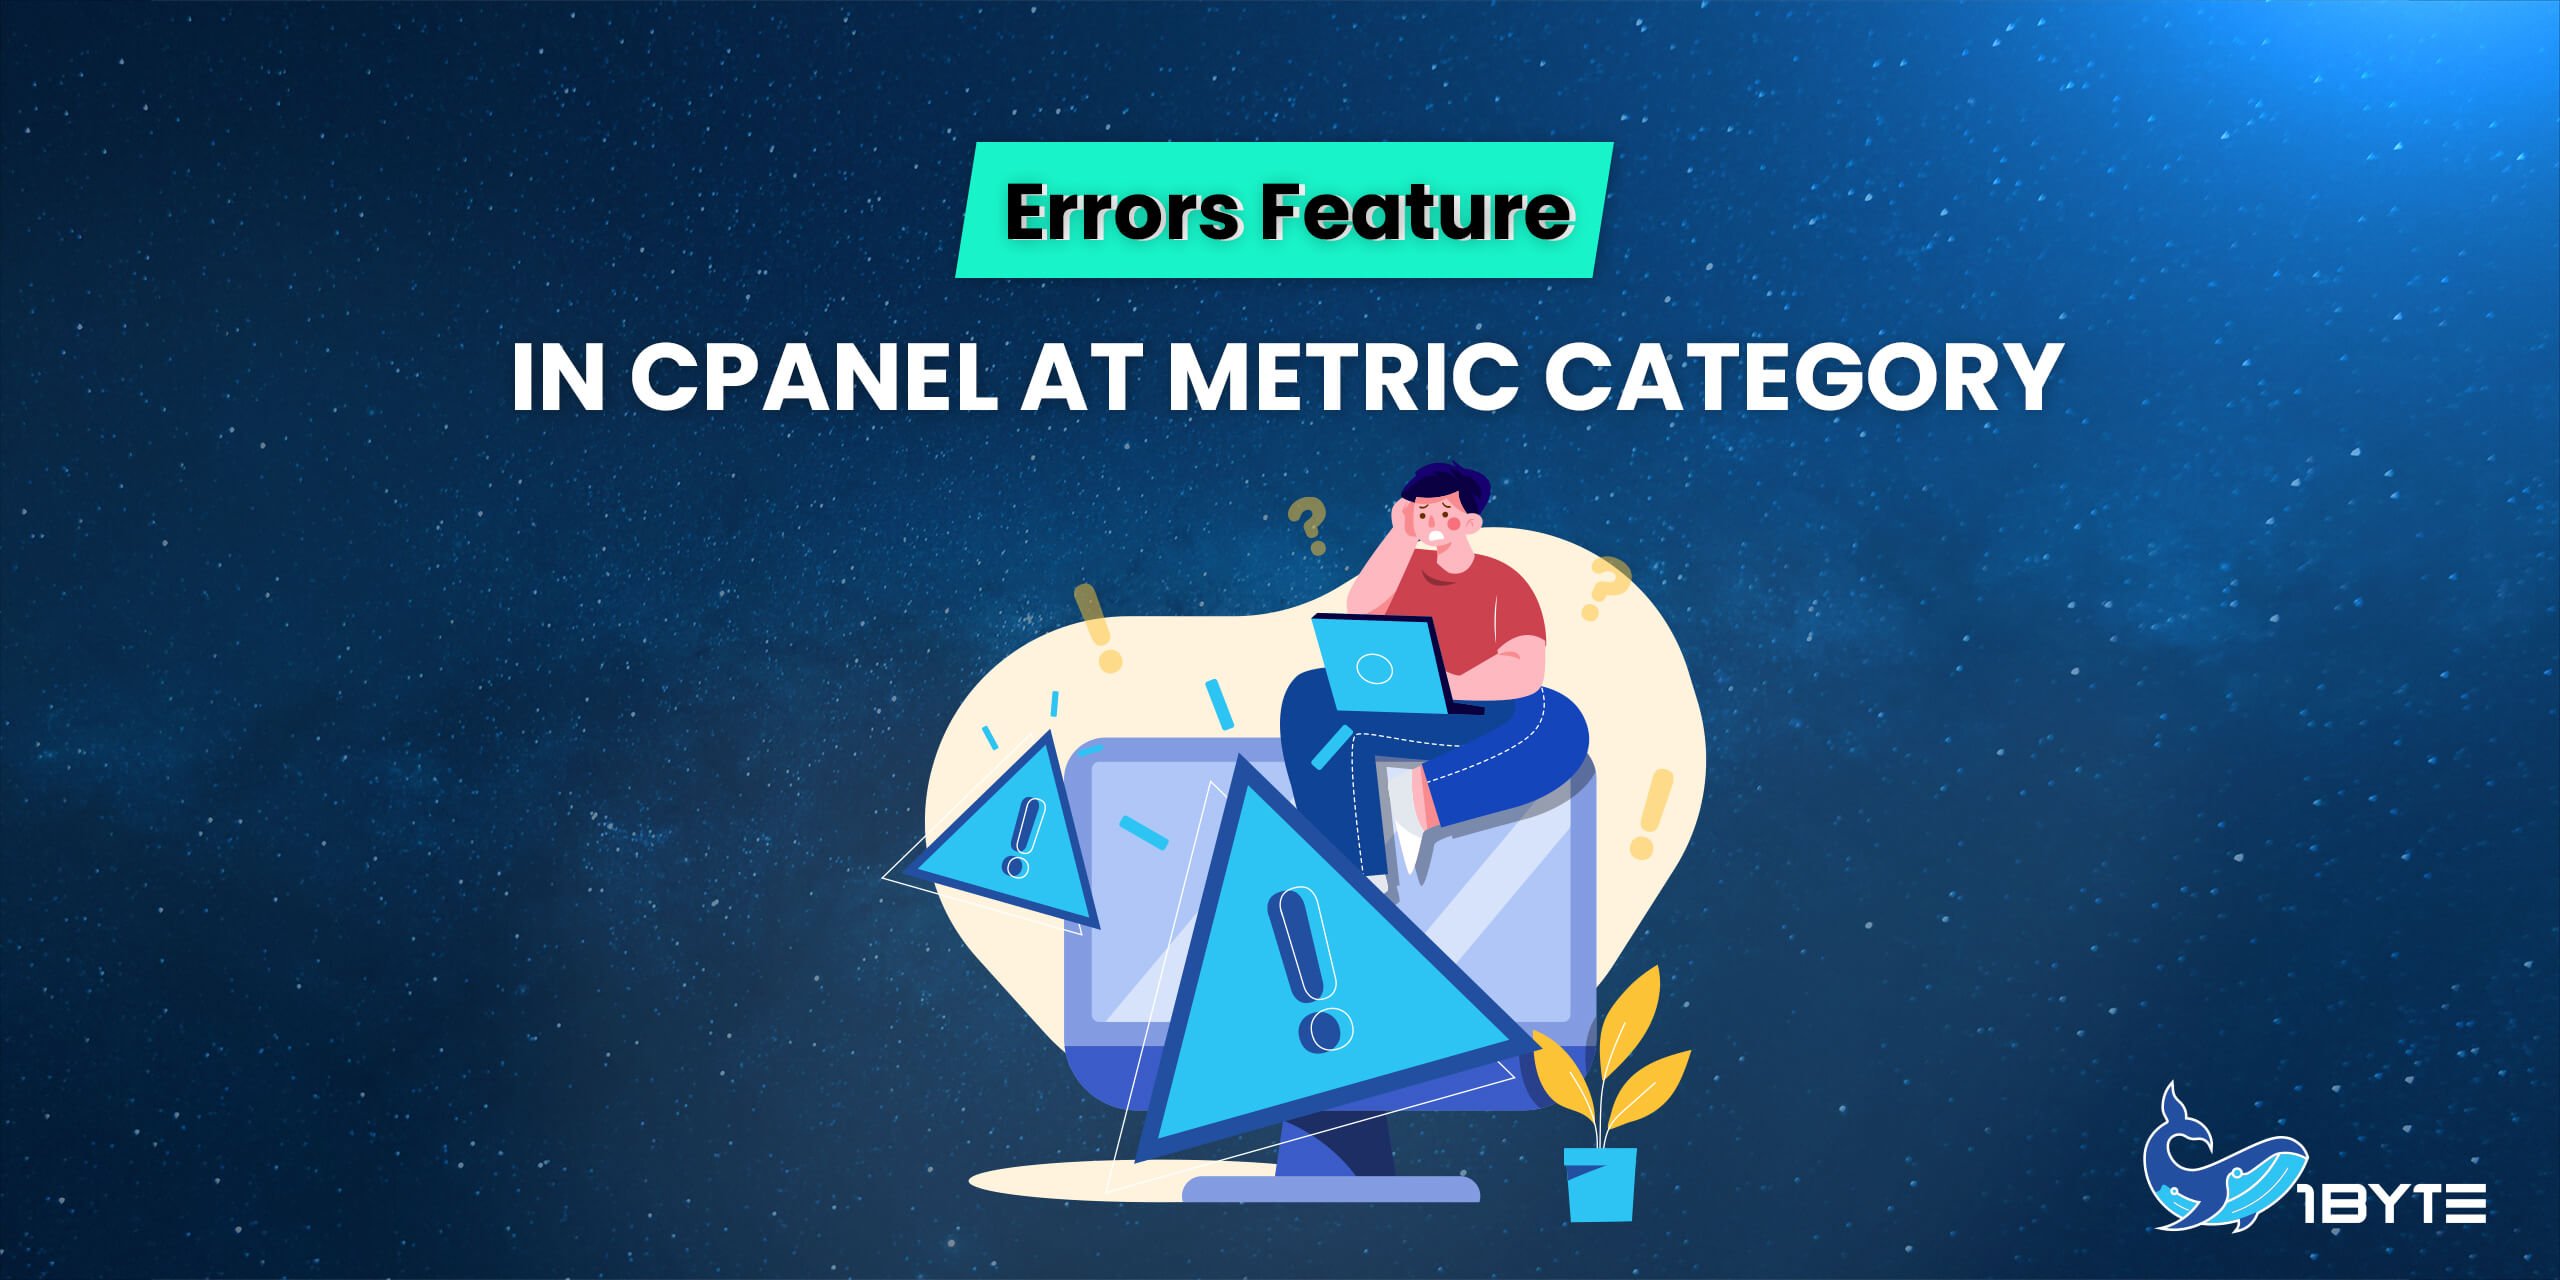 Errors feature in cPanel at Metric Category